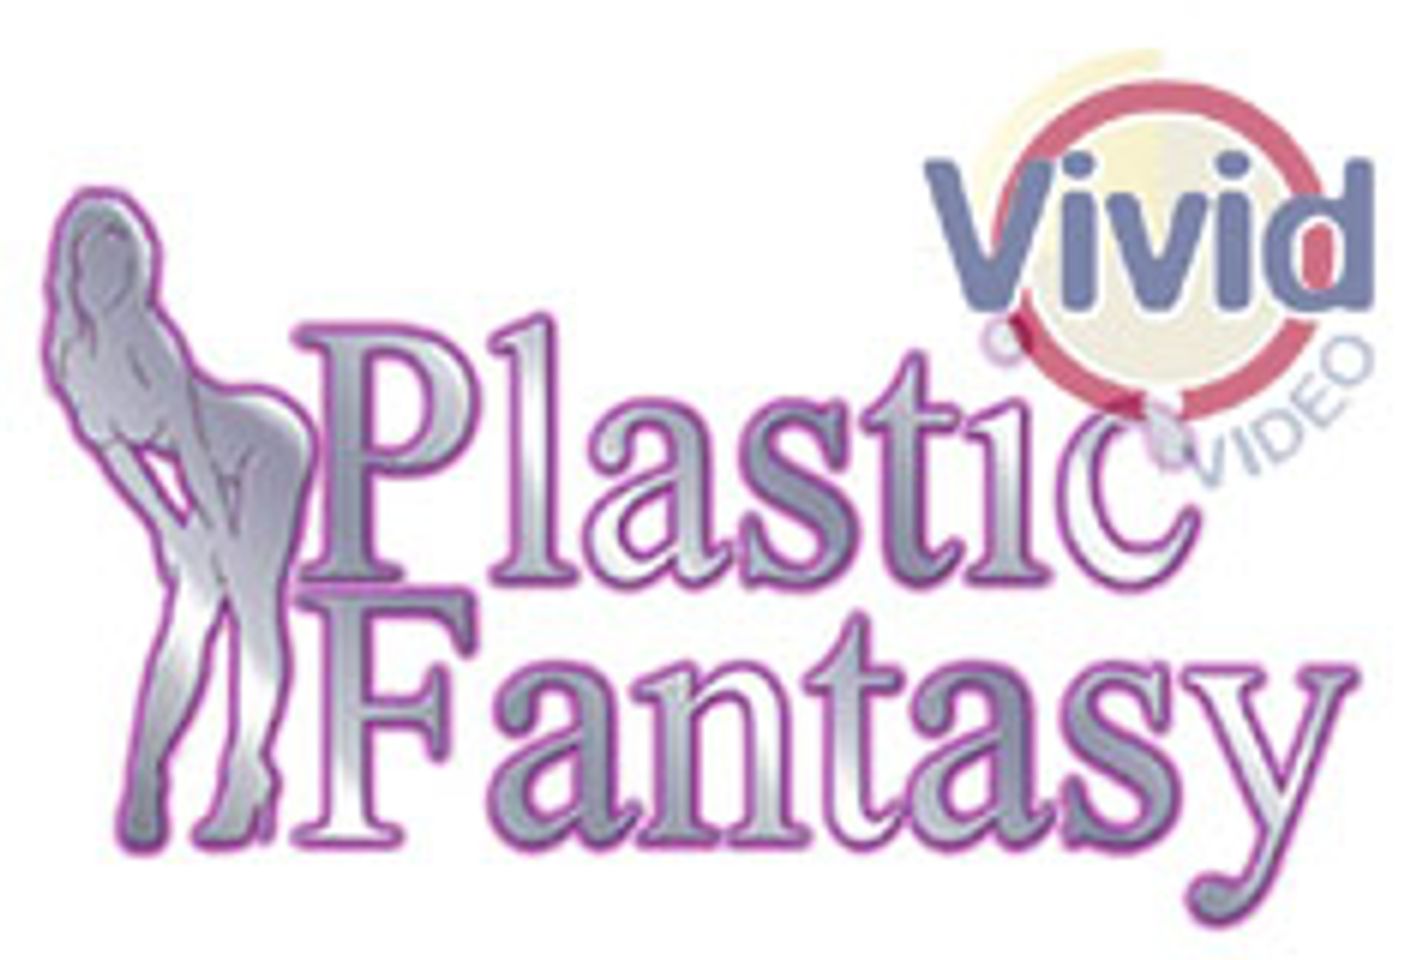 Plastic Fantasy To Release Fifth Series Of Adult Action Figures